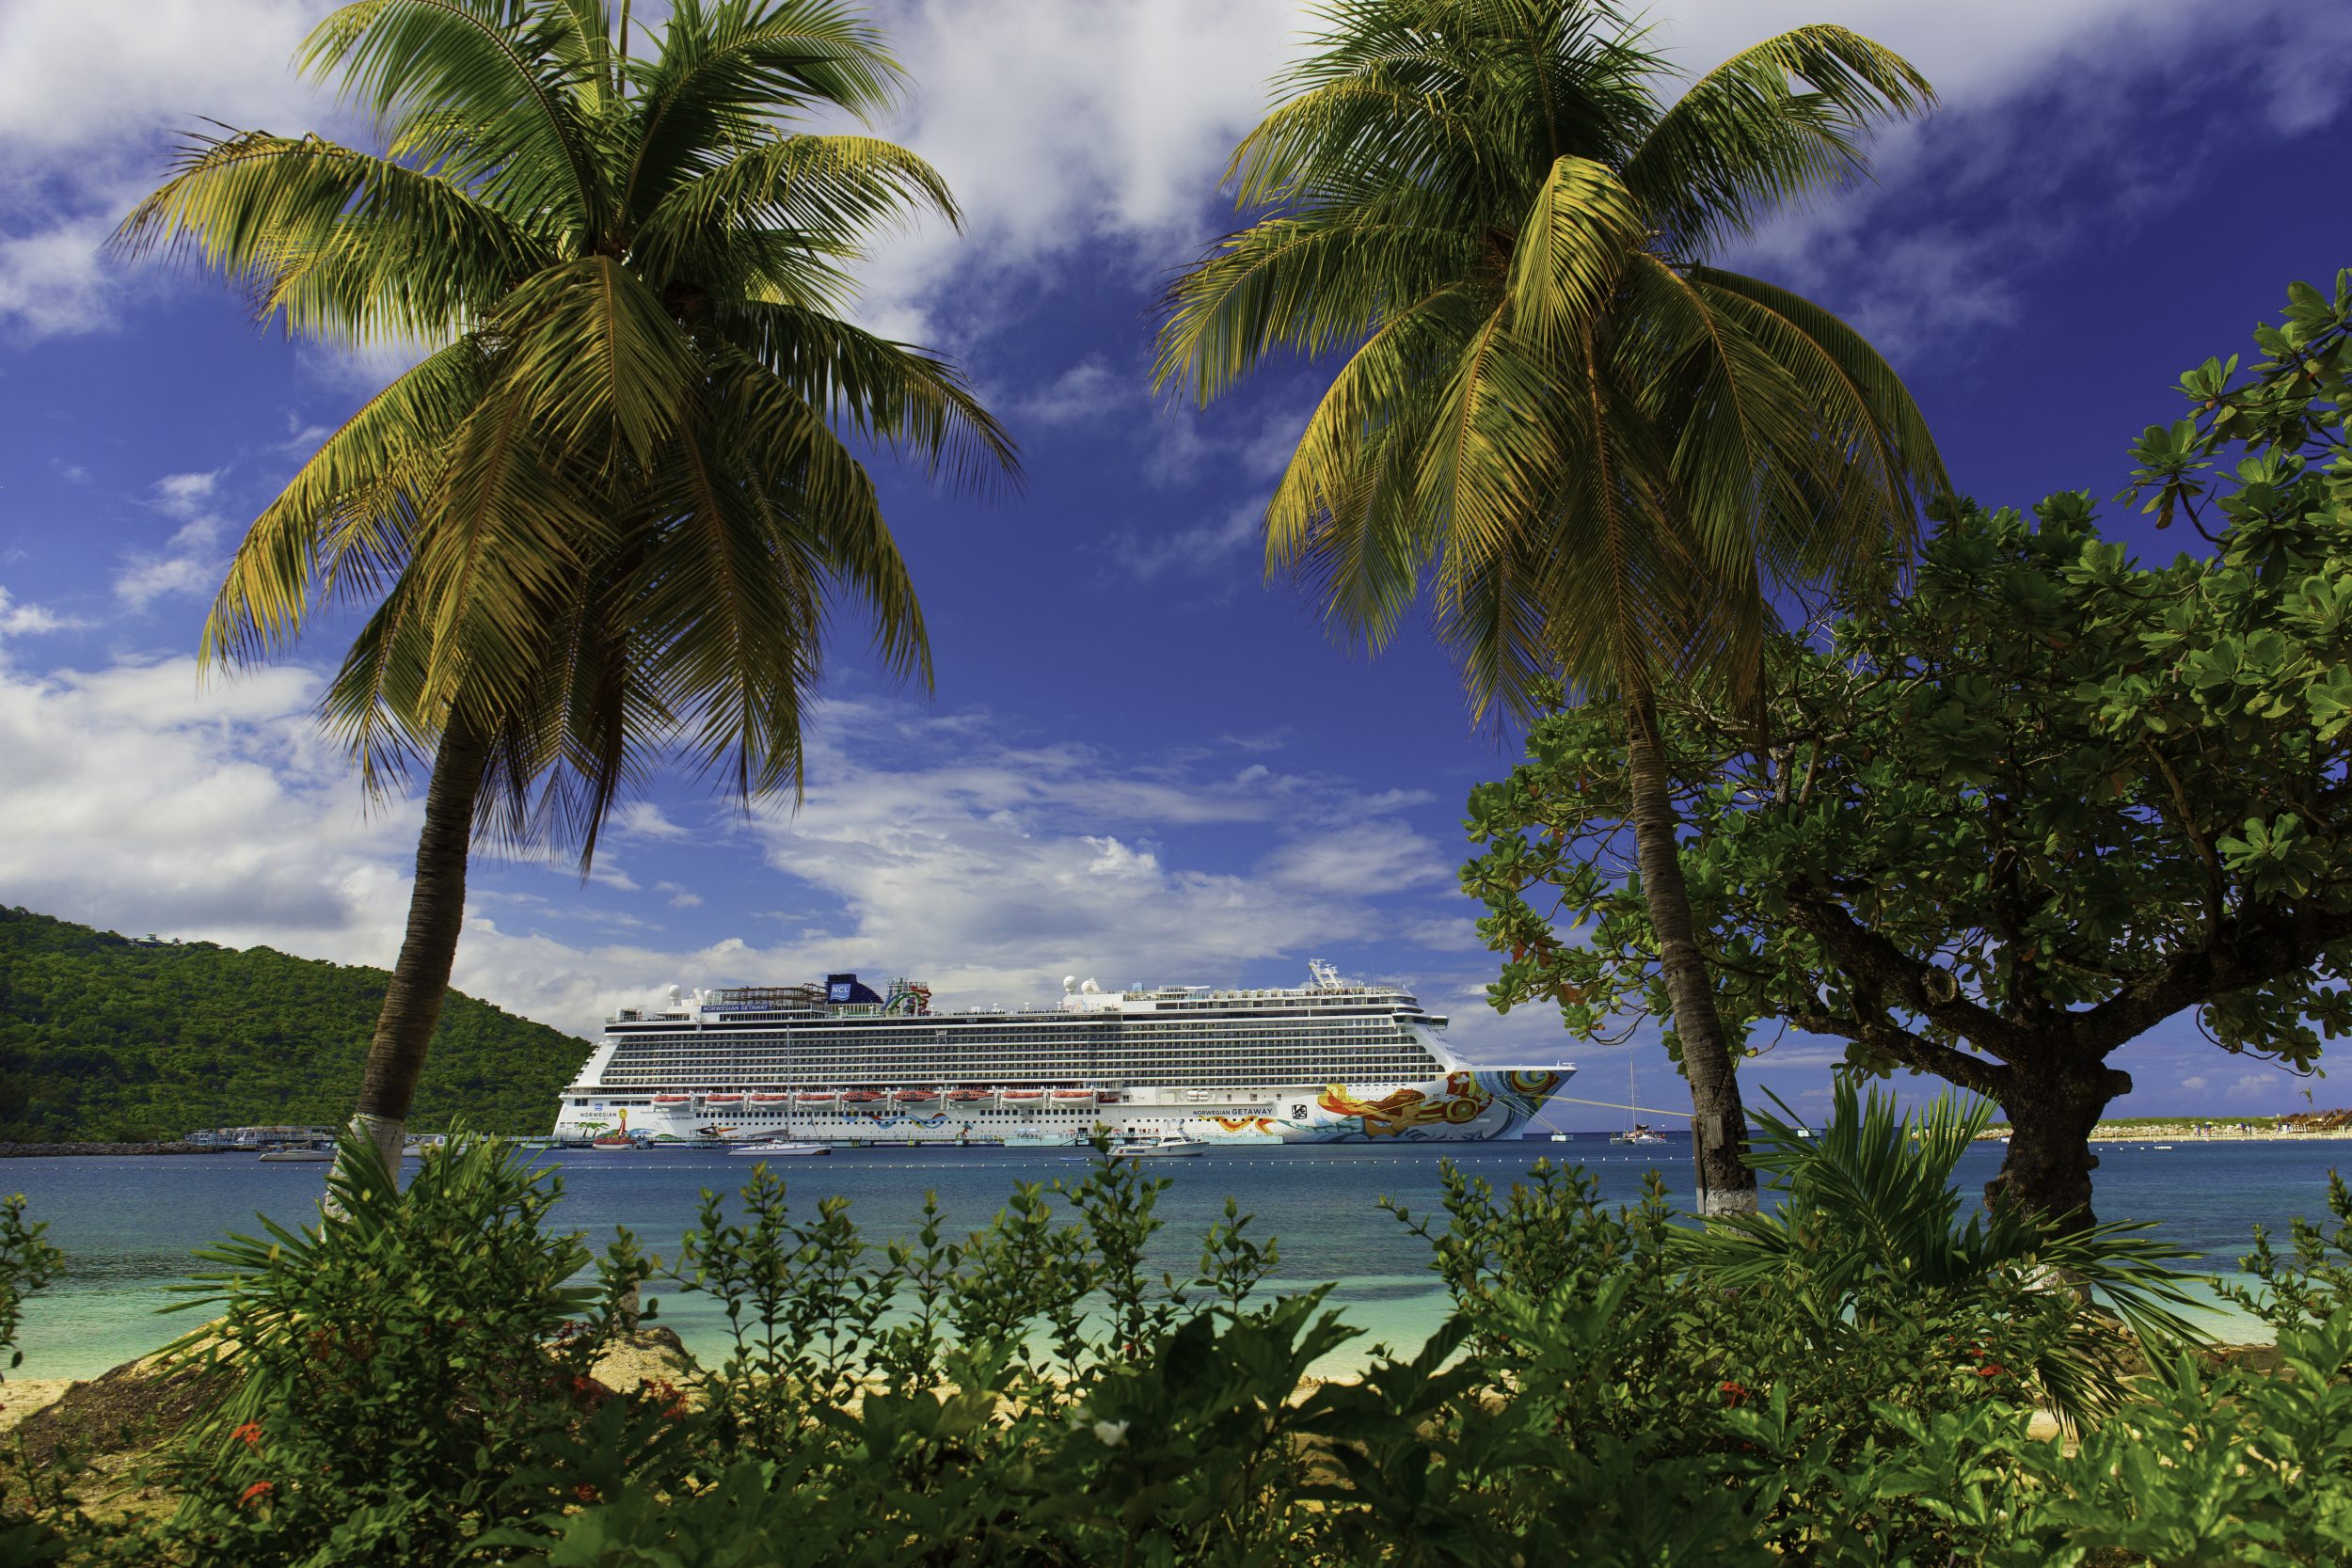 The Caribbean is the most popular place for cruises